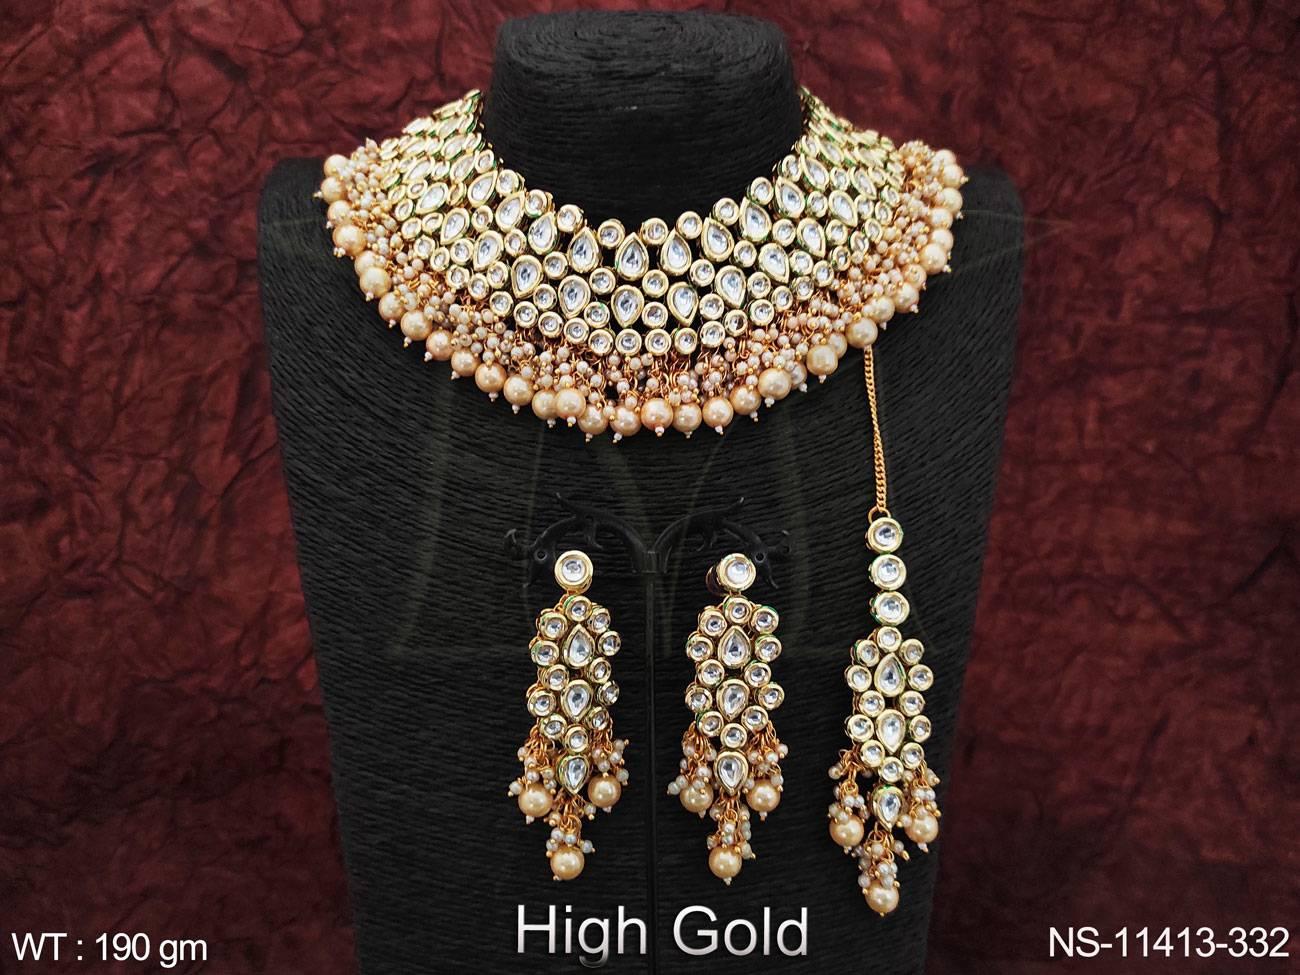 Crafted with high-quality Kundan stones and featuring a stunning high gold polish, this choker necklace set is the perfect addition to your party wear collection.